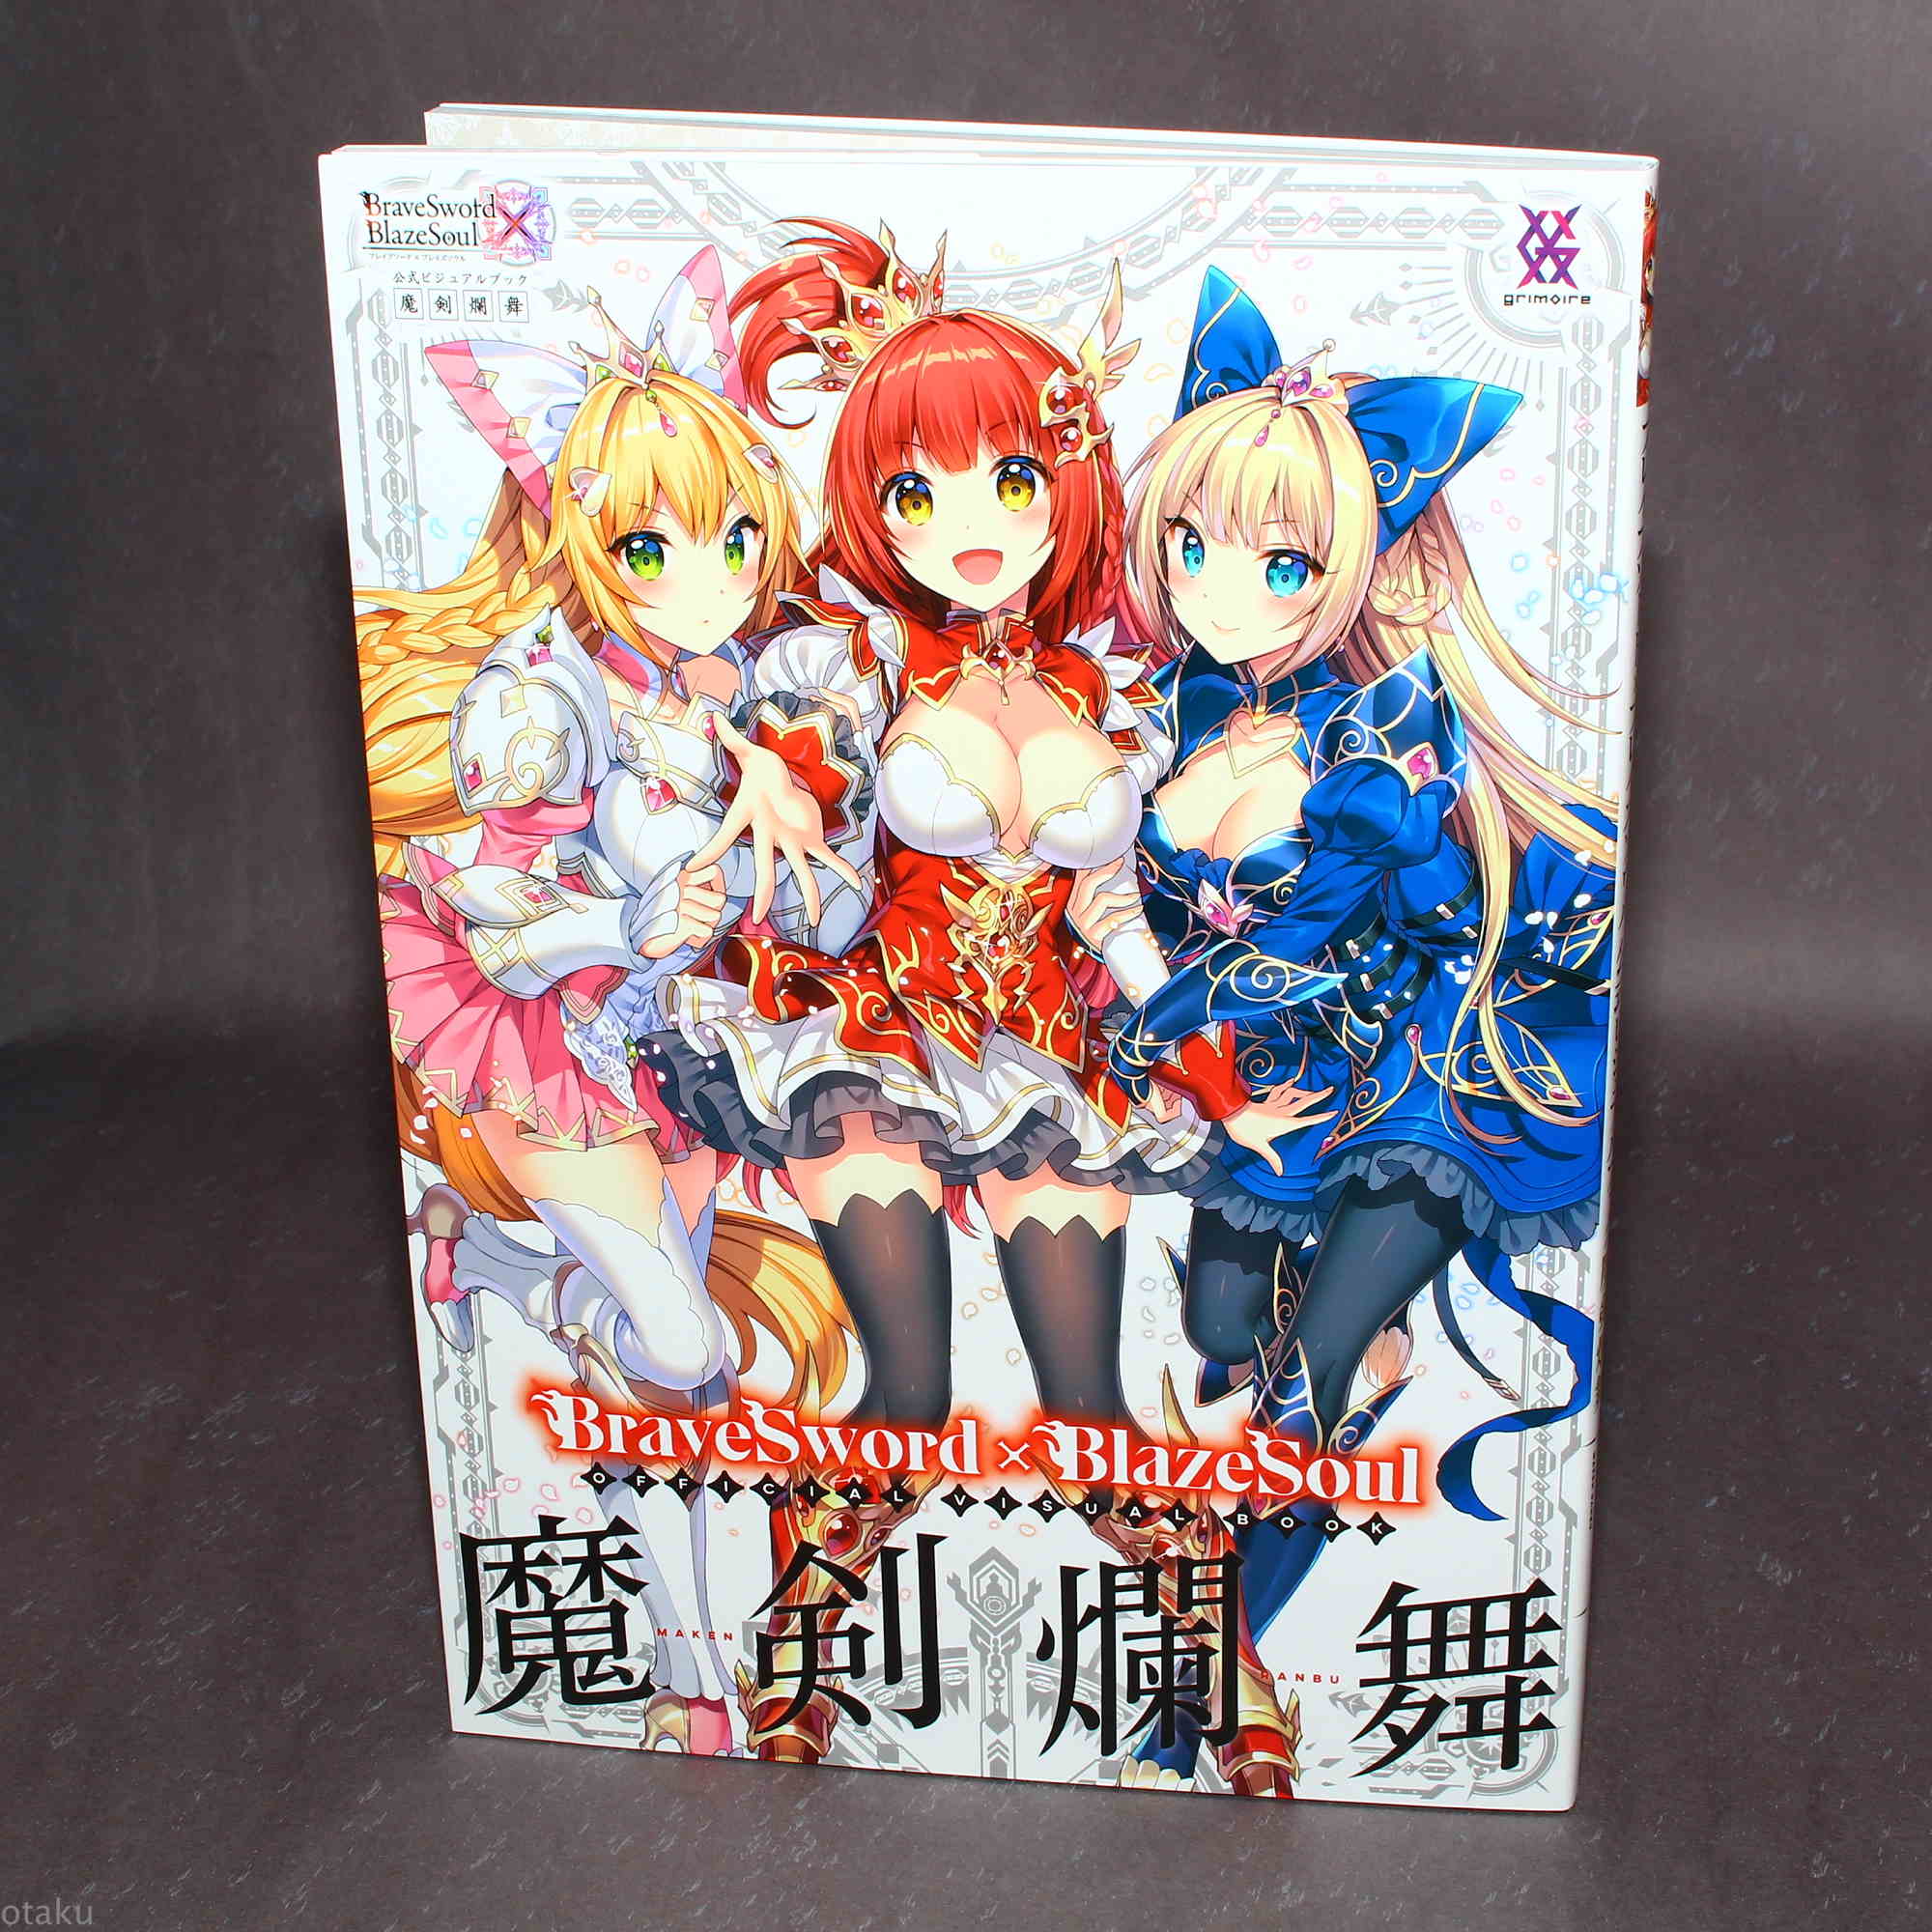 Brave Sword X Blaze Soul or Drag Character Card Game Sleeve Collectible Mt352 for sale online 